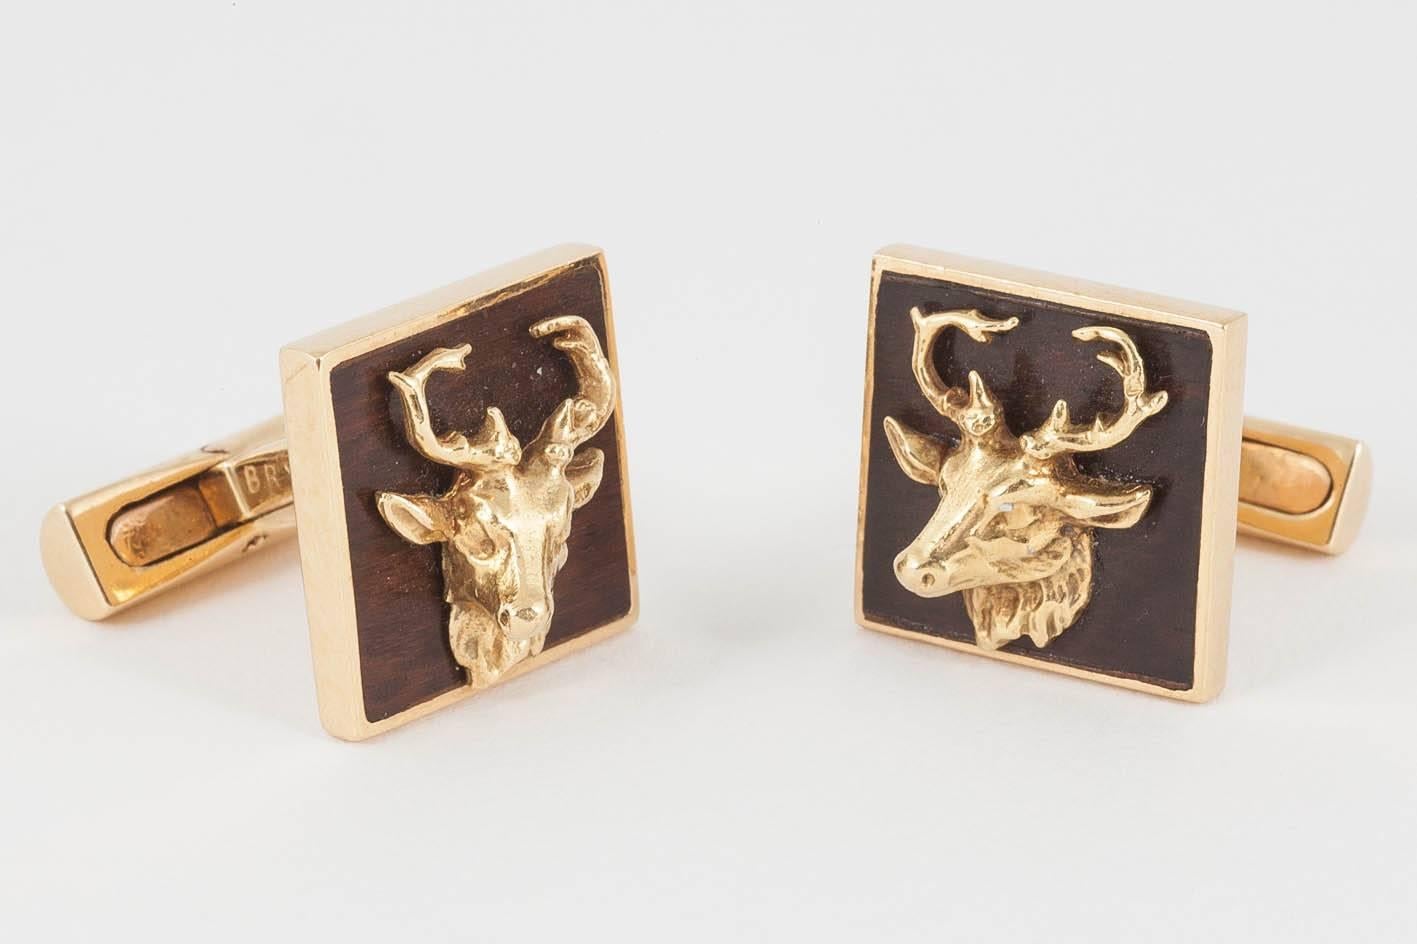 A heavy quality and unusual pair of single sided cufflinks in 18ct yellow gold with a bog oak [wood]background and mounted,a stags head with antlers.Signed BRY of Paris with French marks and numbered 8585.c.1930-50